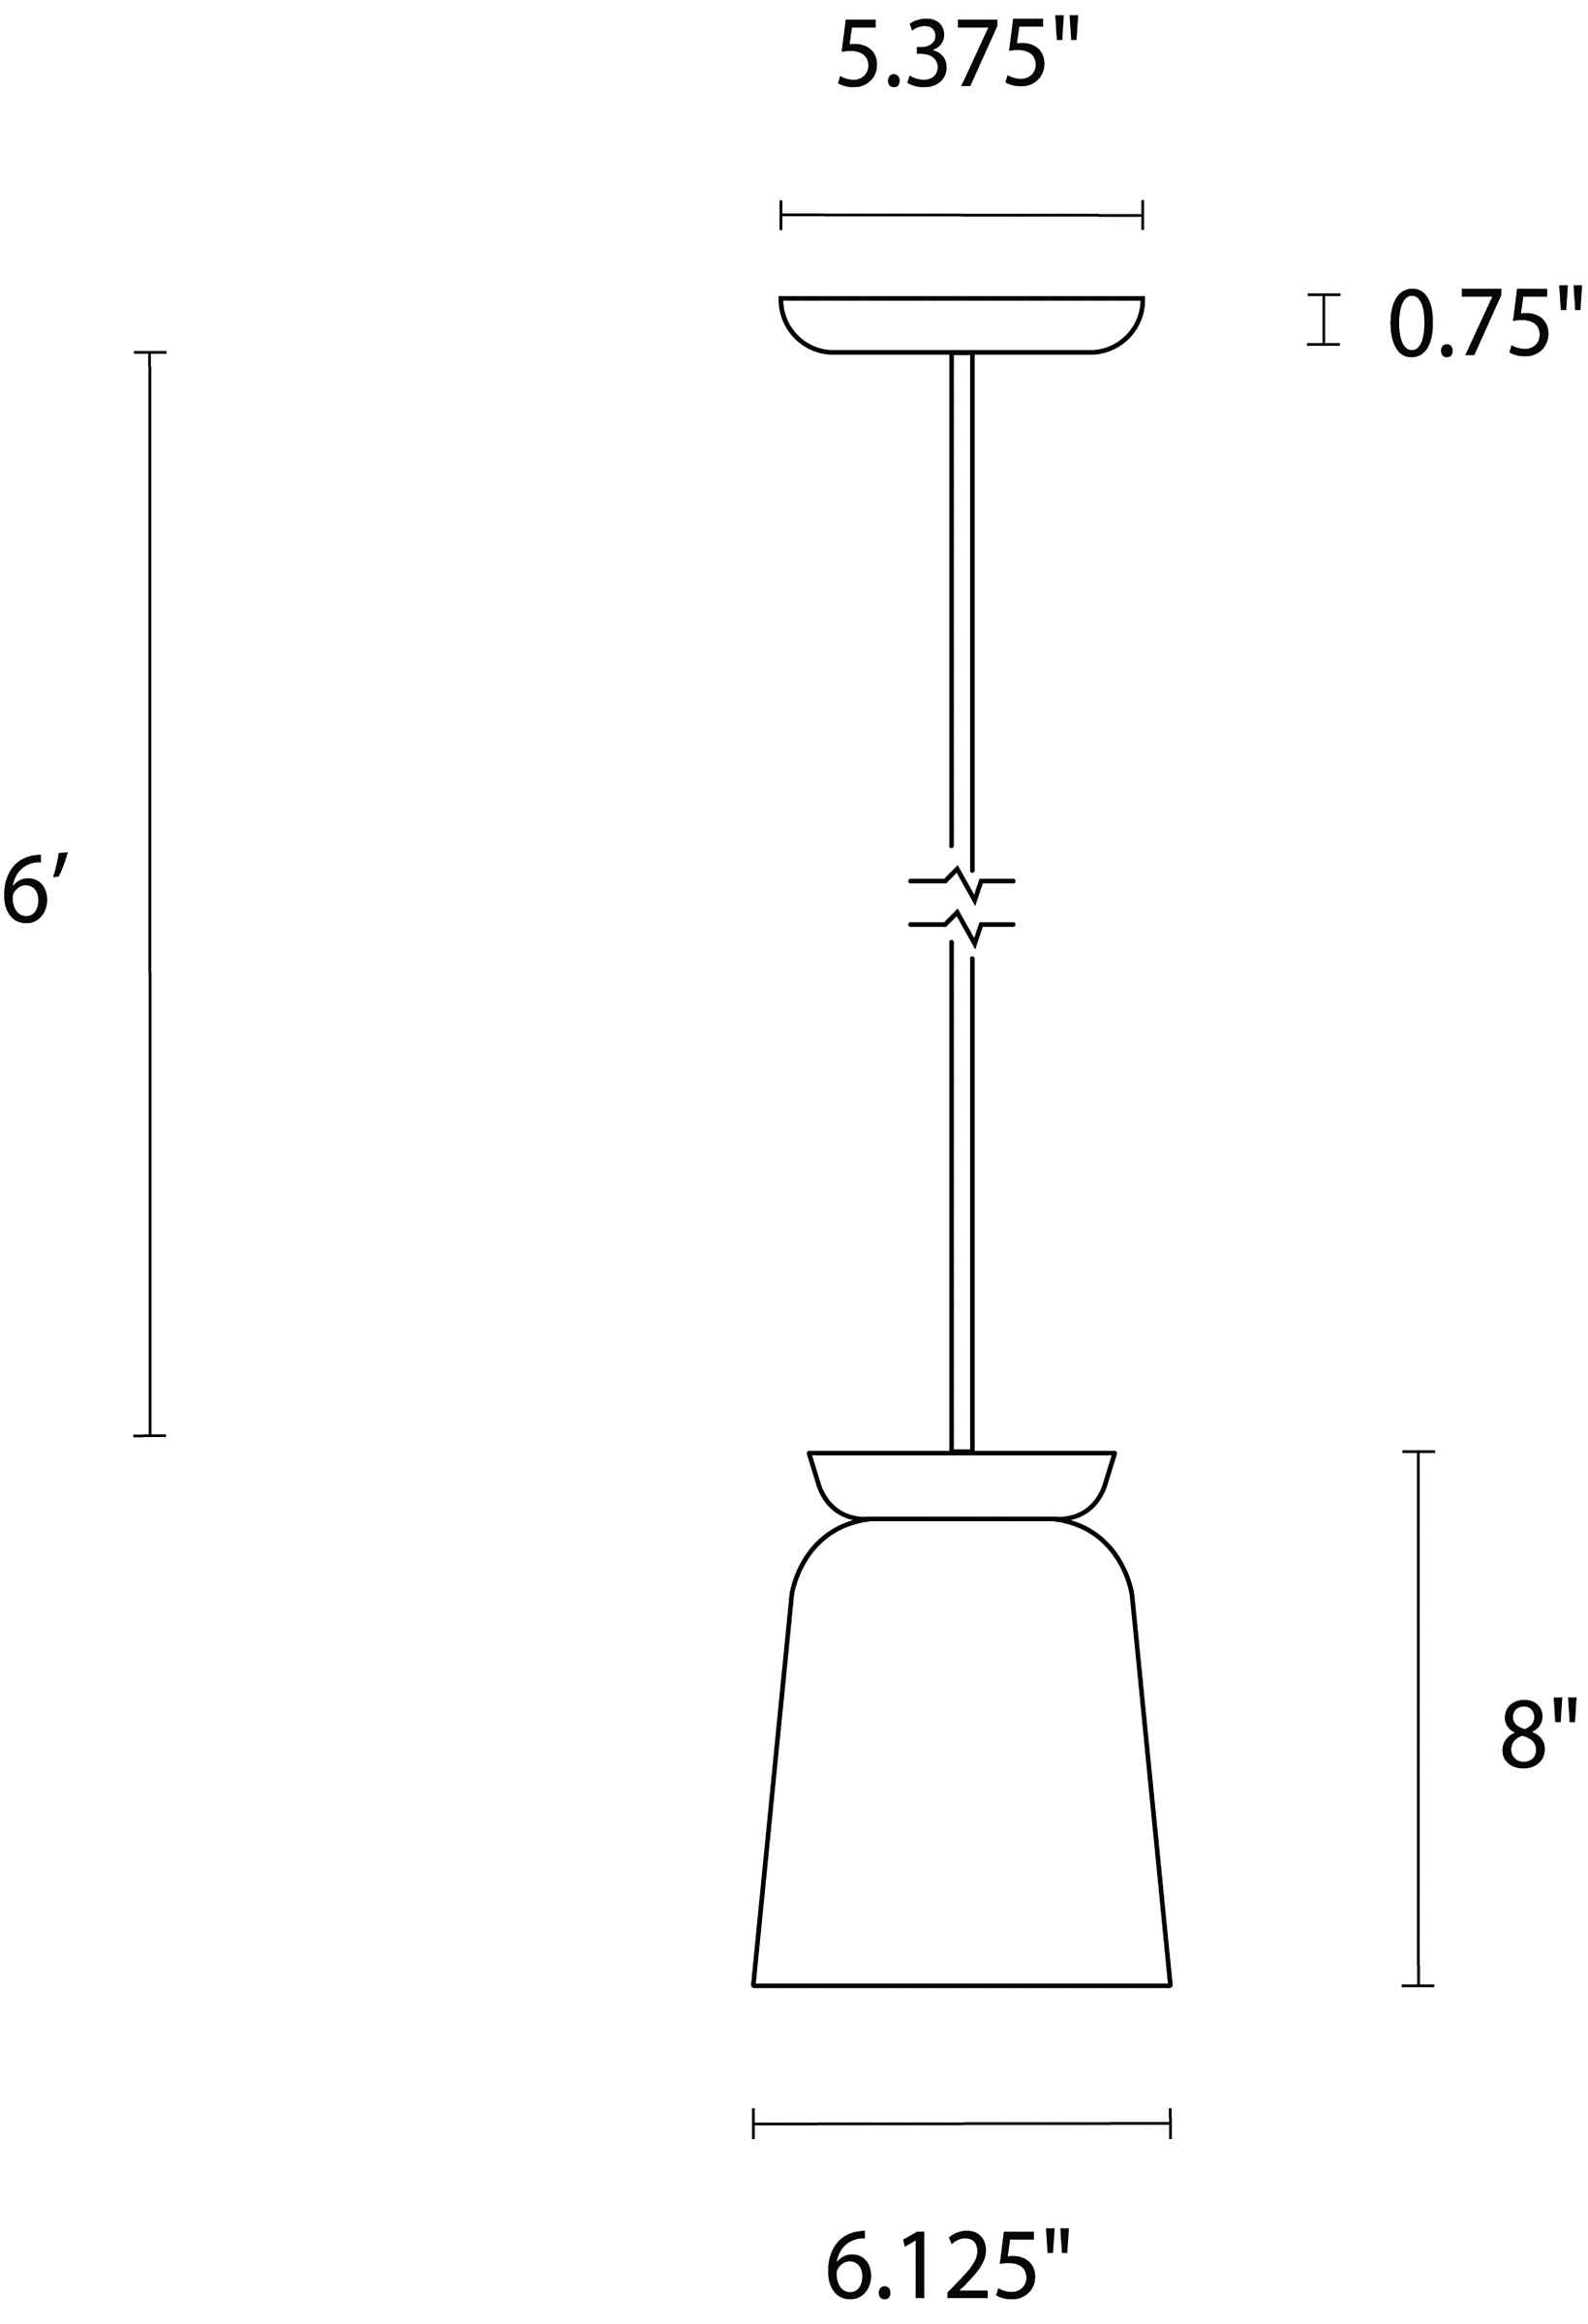 Illustration of Bray 6-round pendant with dimensions.